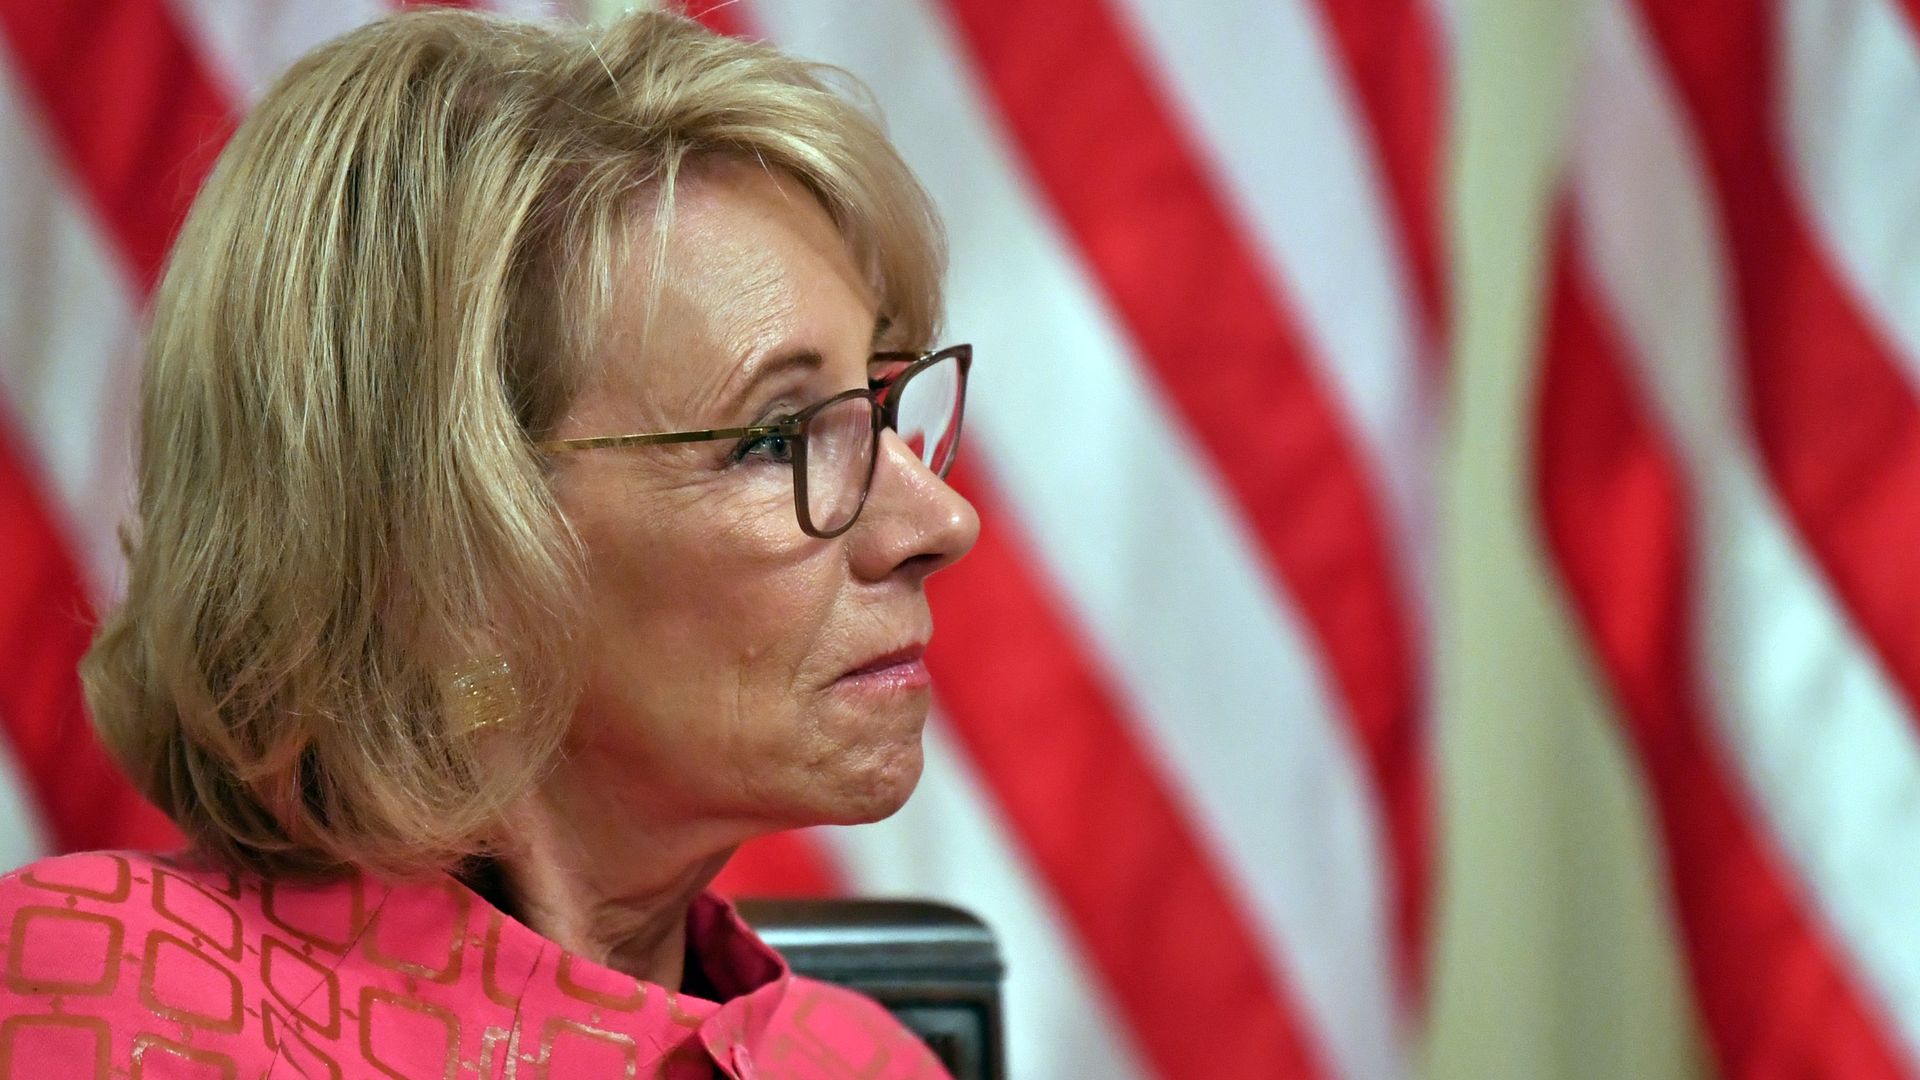 Photo of Betsy DeVos' side profile against the backdrop of an American flag